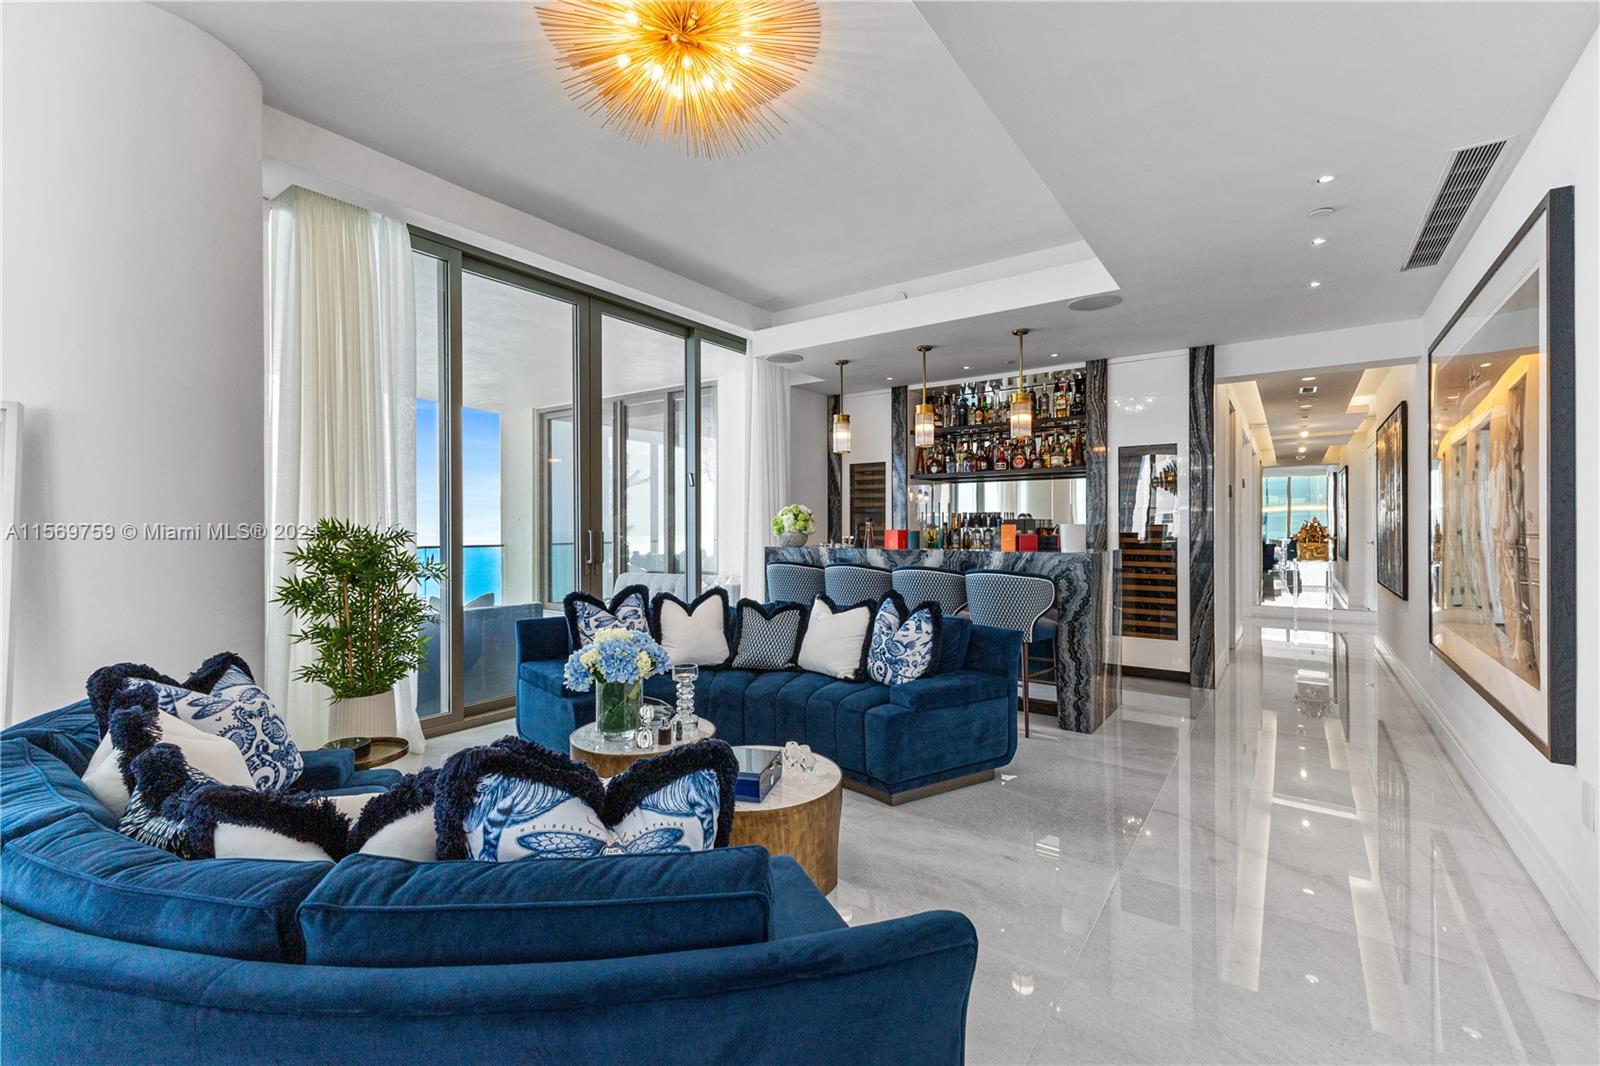 Property for Sale at Address Not Disclosed, Sunny Isles Beach, Miami-Dade County, Florida - Bedrooms: 6 
Bathrooms: 8  - $24,950,000